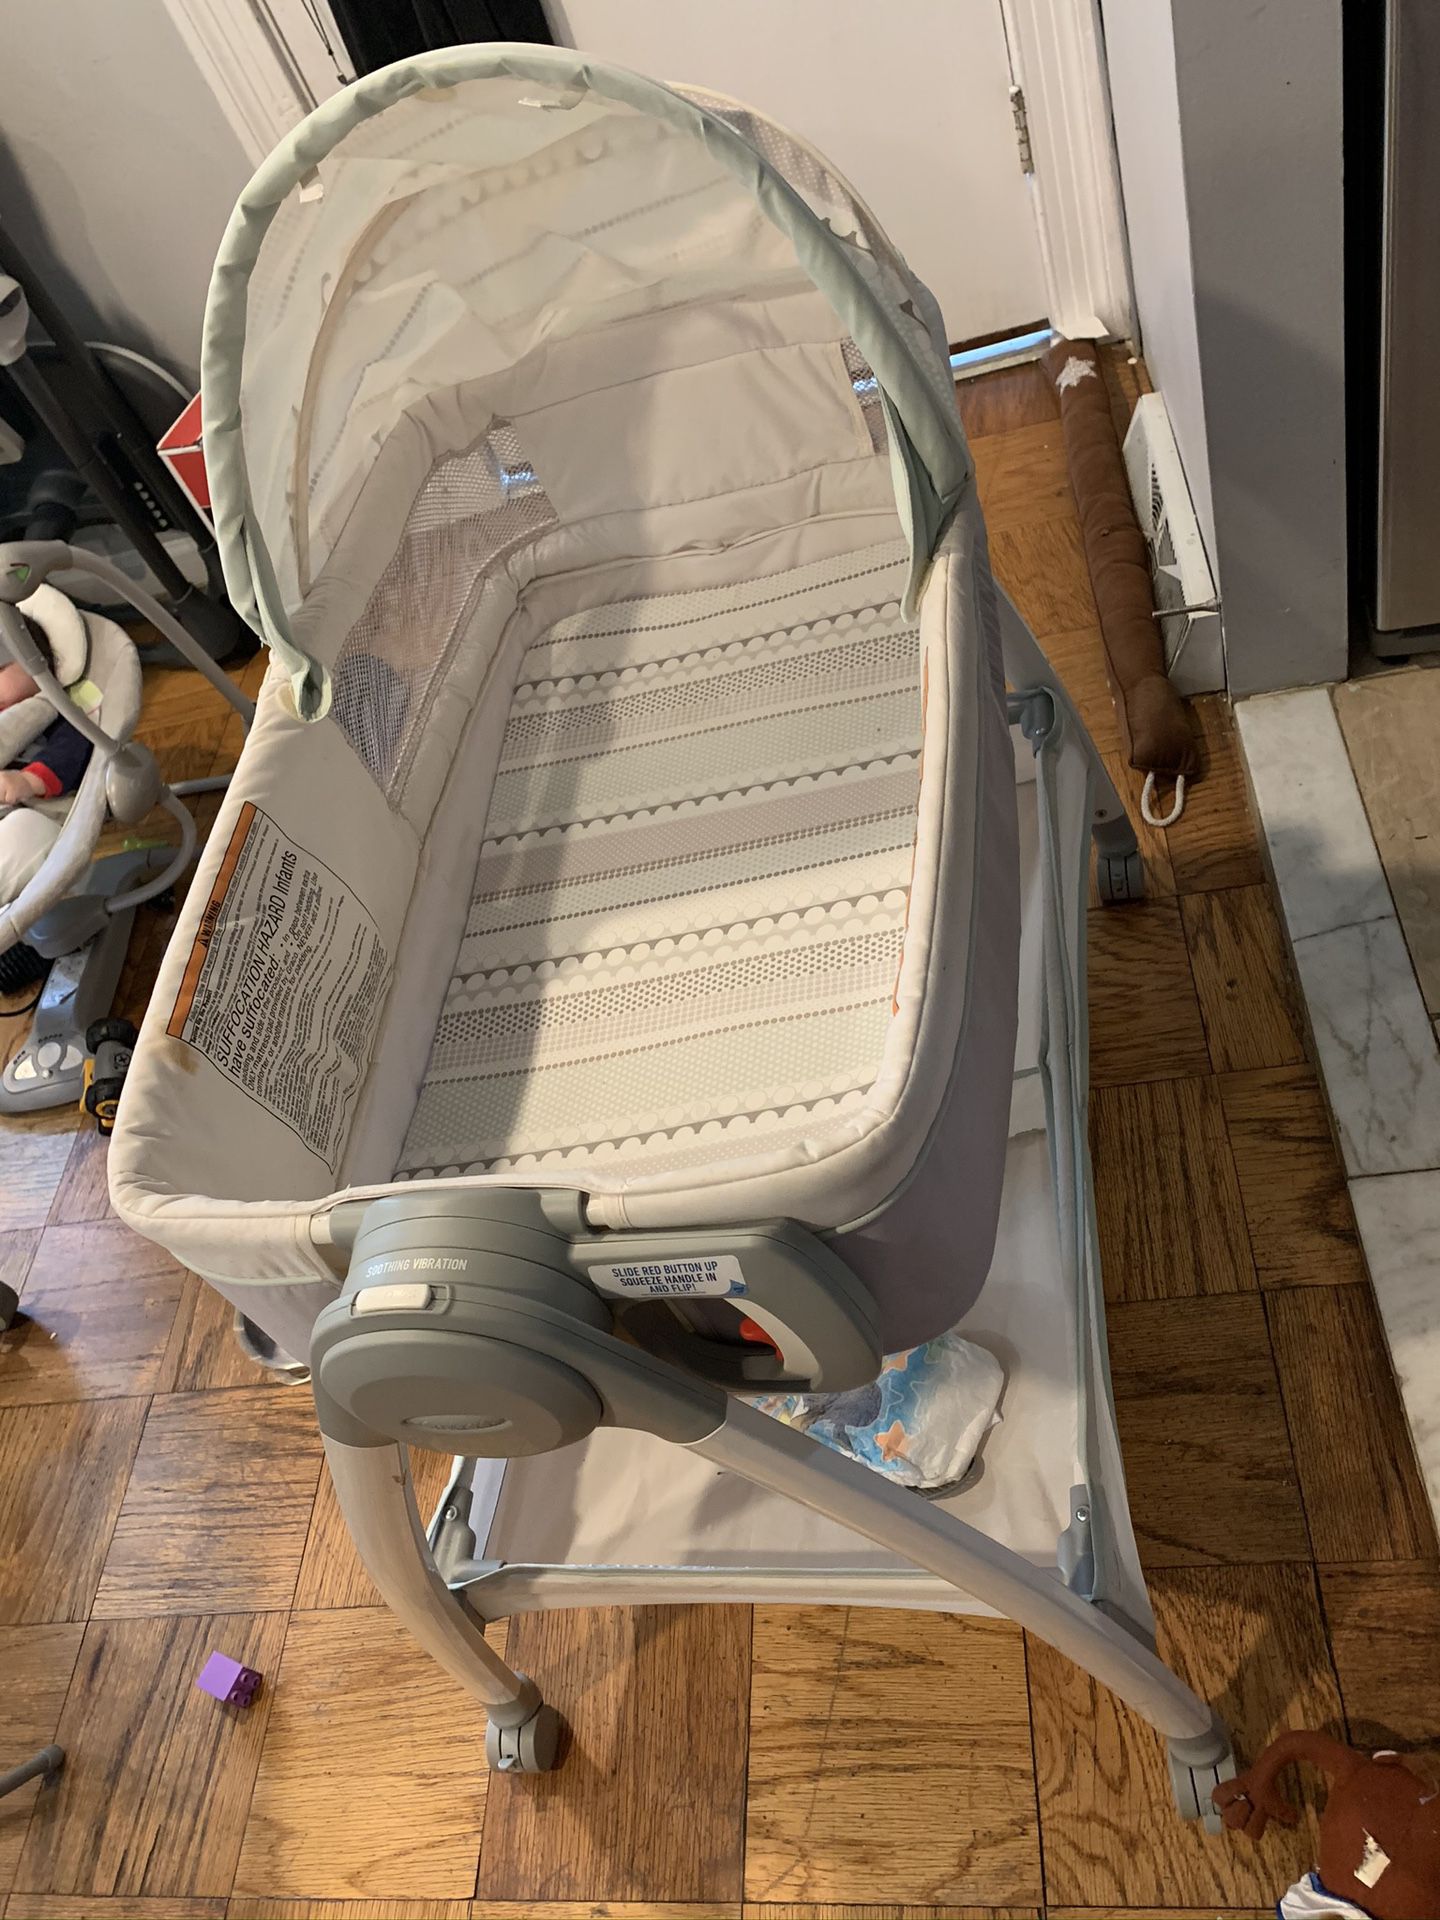 Convertable bassinet and diaper changing table